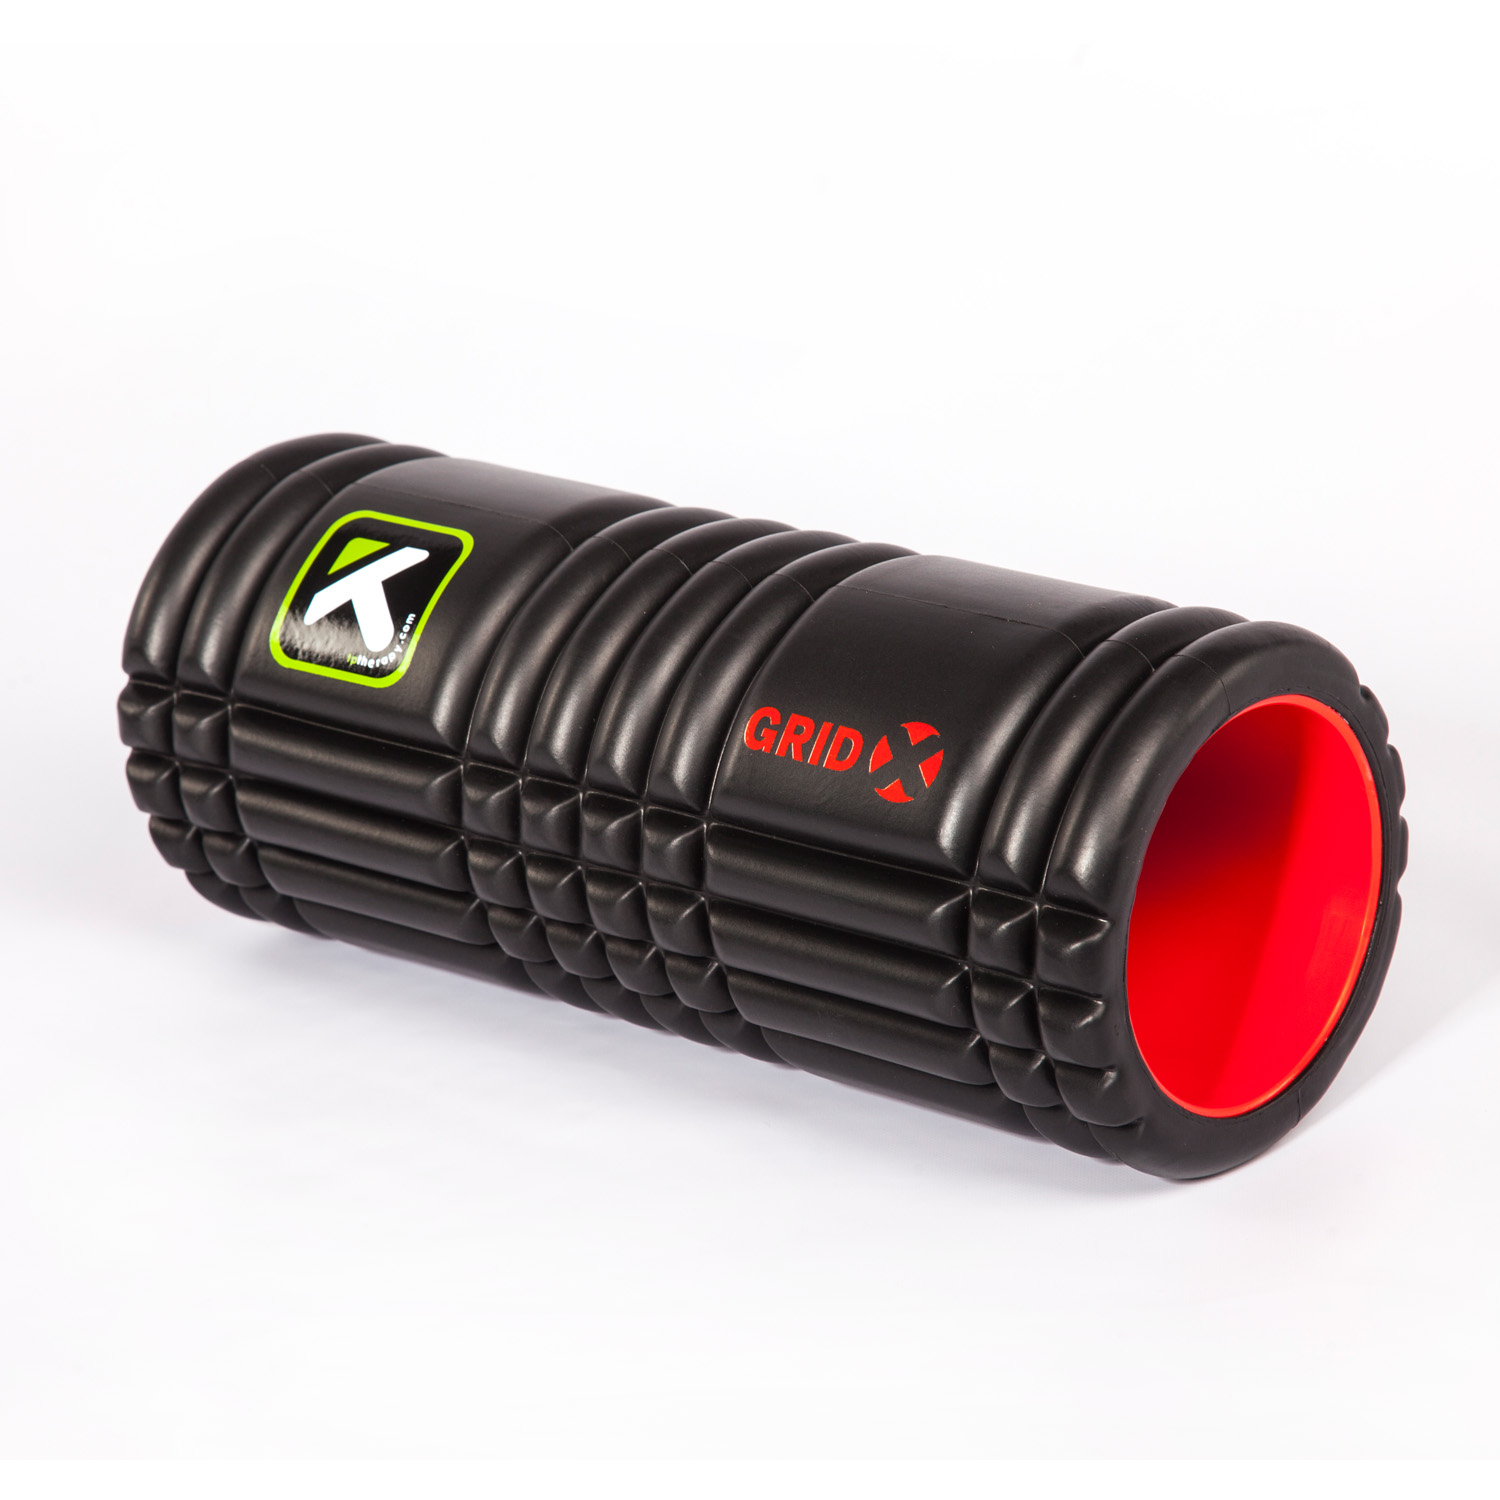 Triggerpoint The Grid X Foamroller